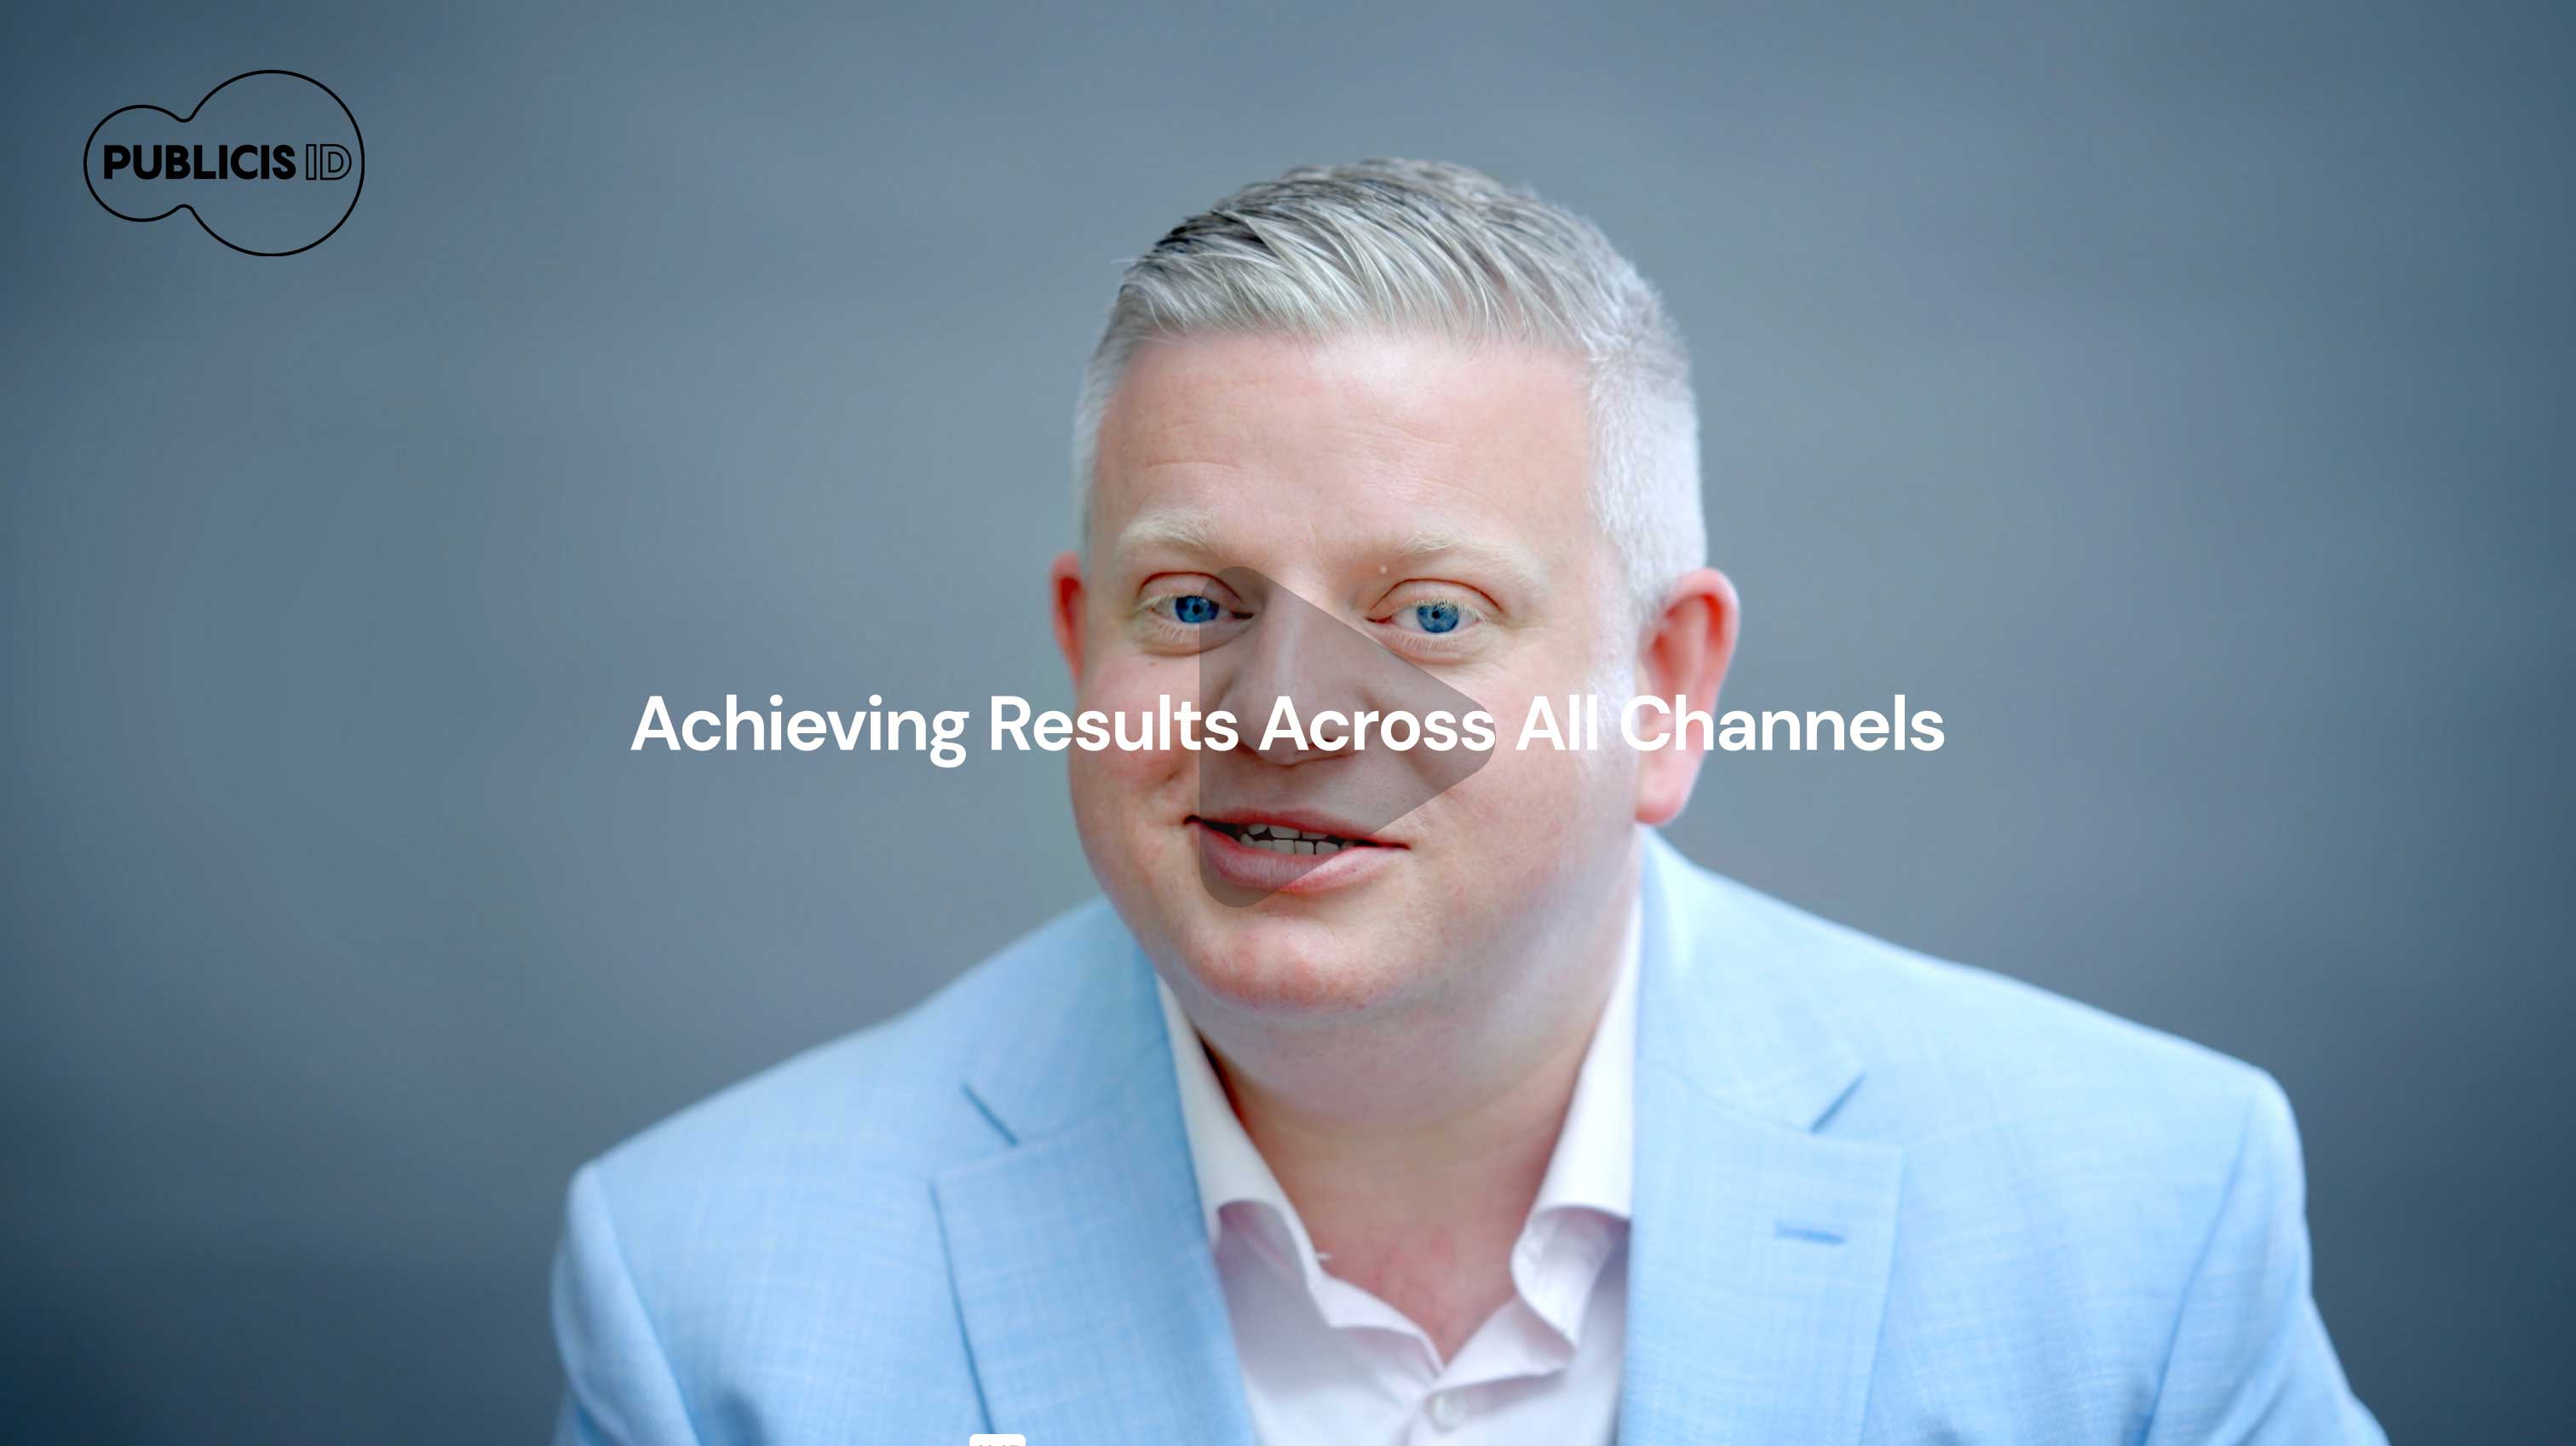 Publicis ID - Achieving Results Across All Channels